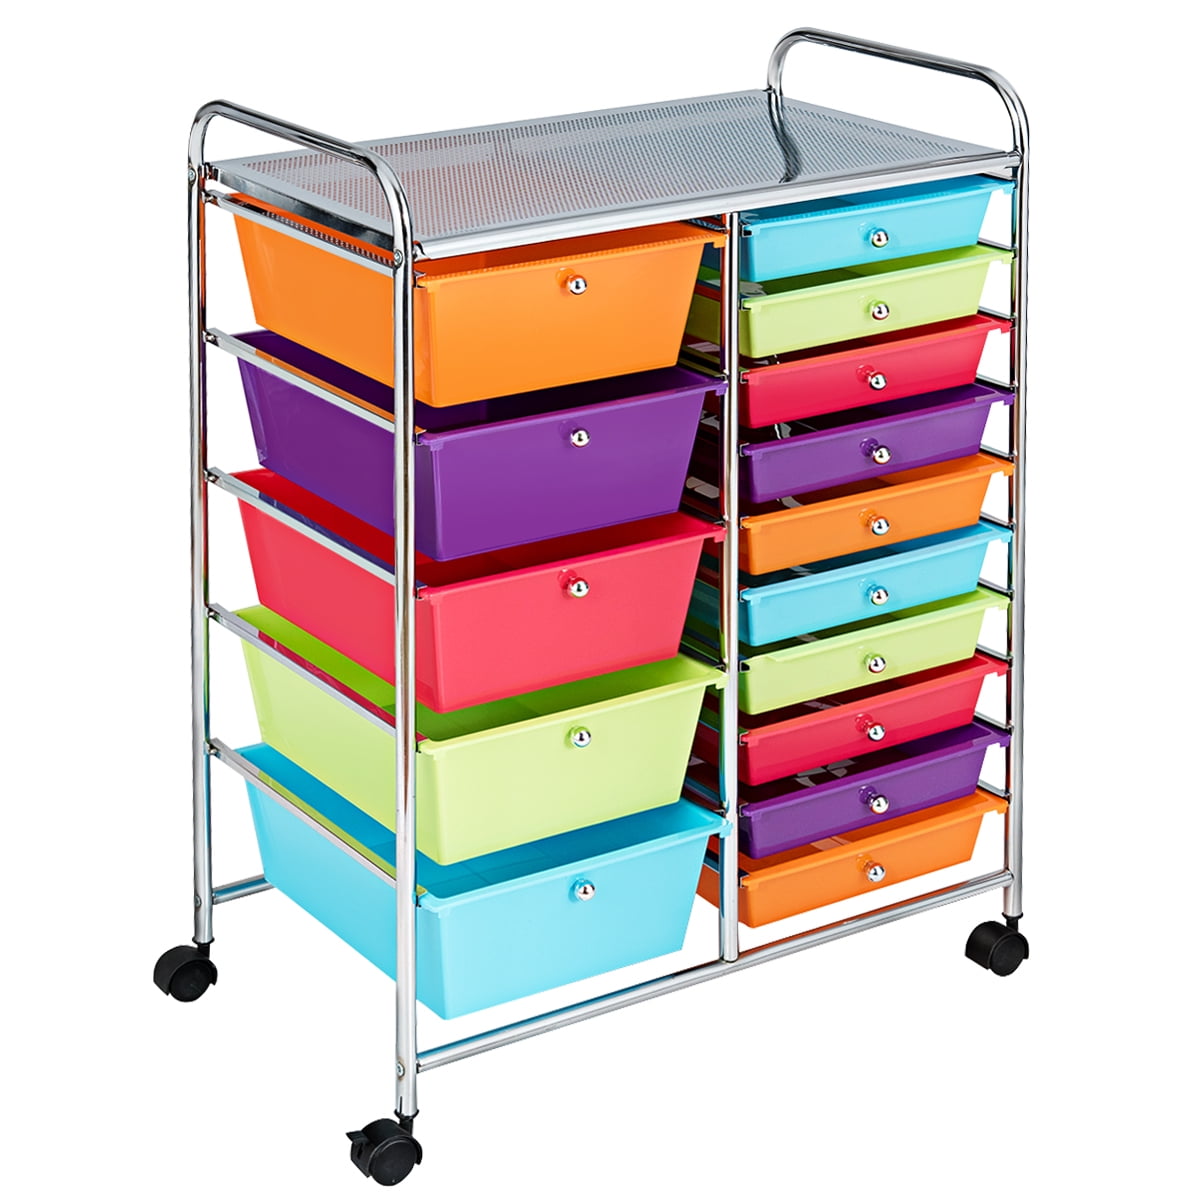 Mobile Organizer, 20 Drawers, 25 x 38 x 15-1/4 Inches, Multiple Colors